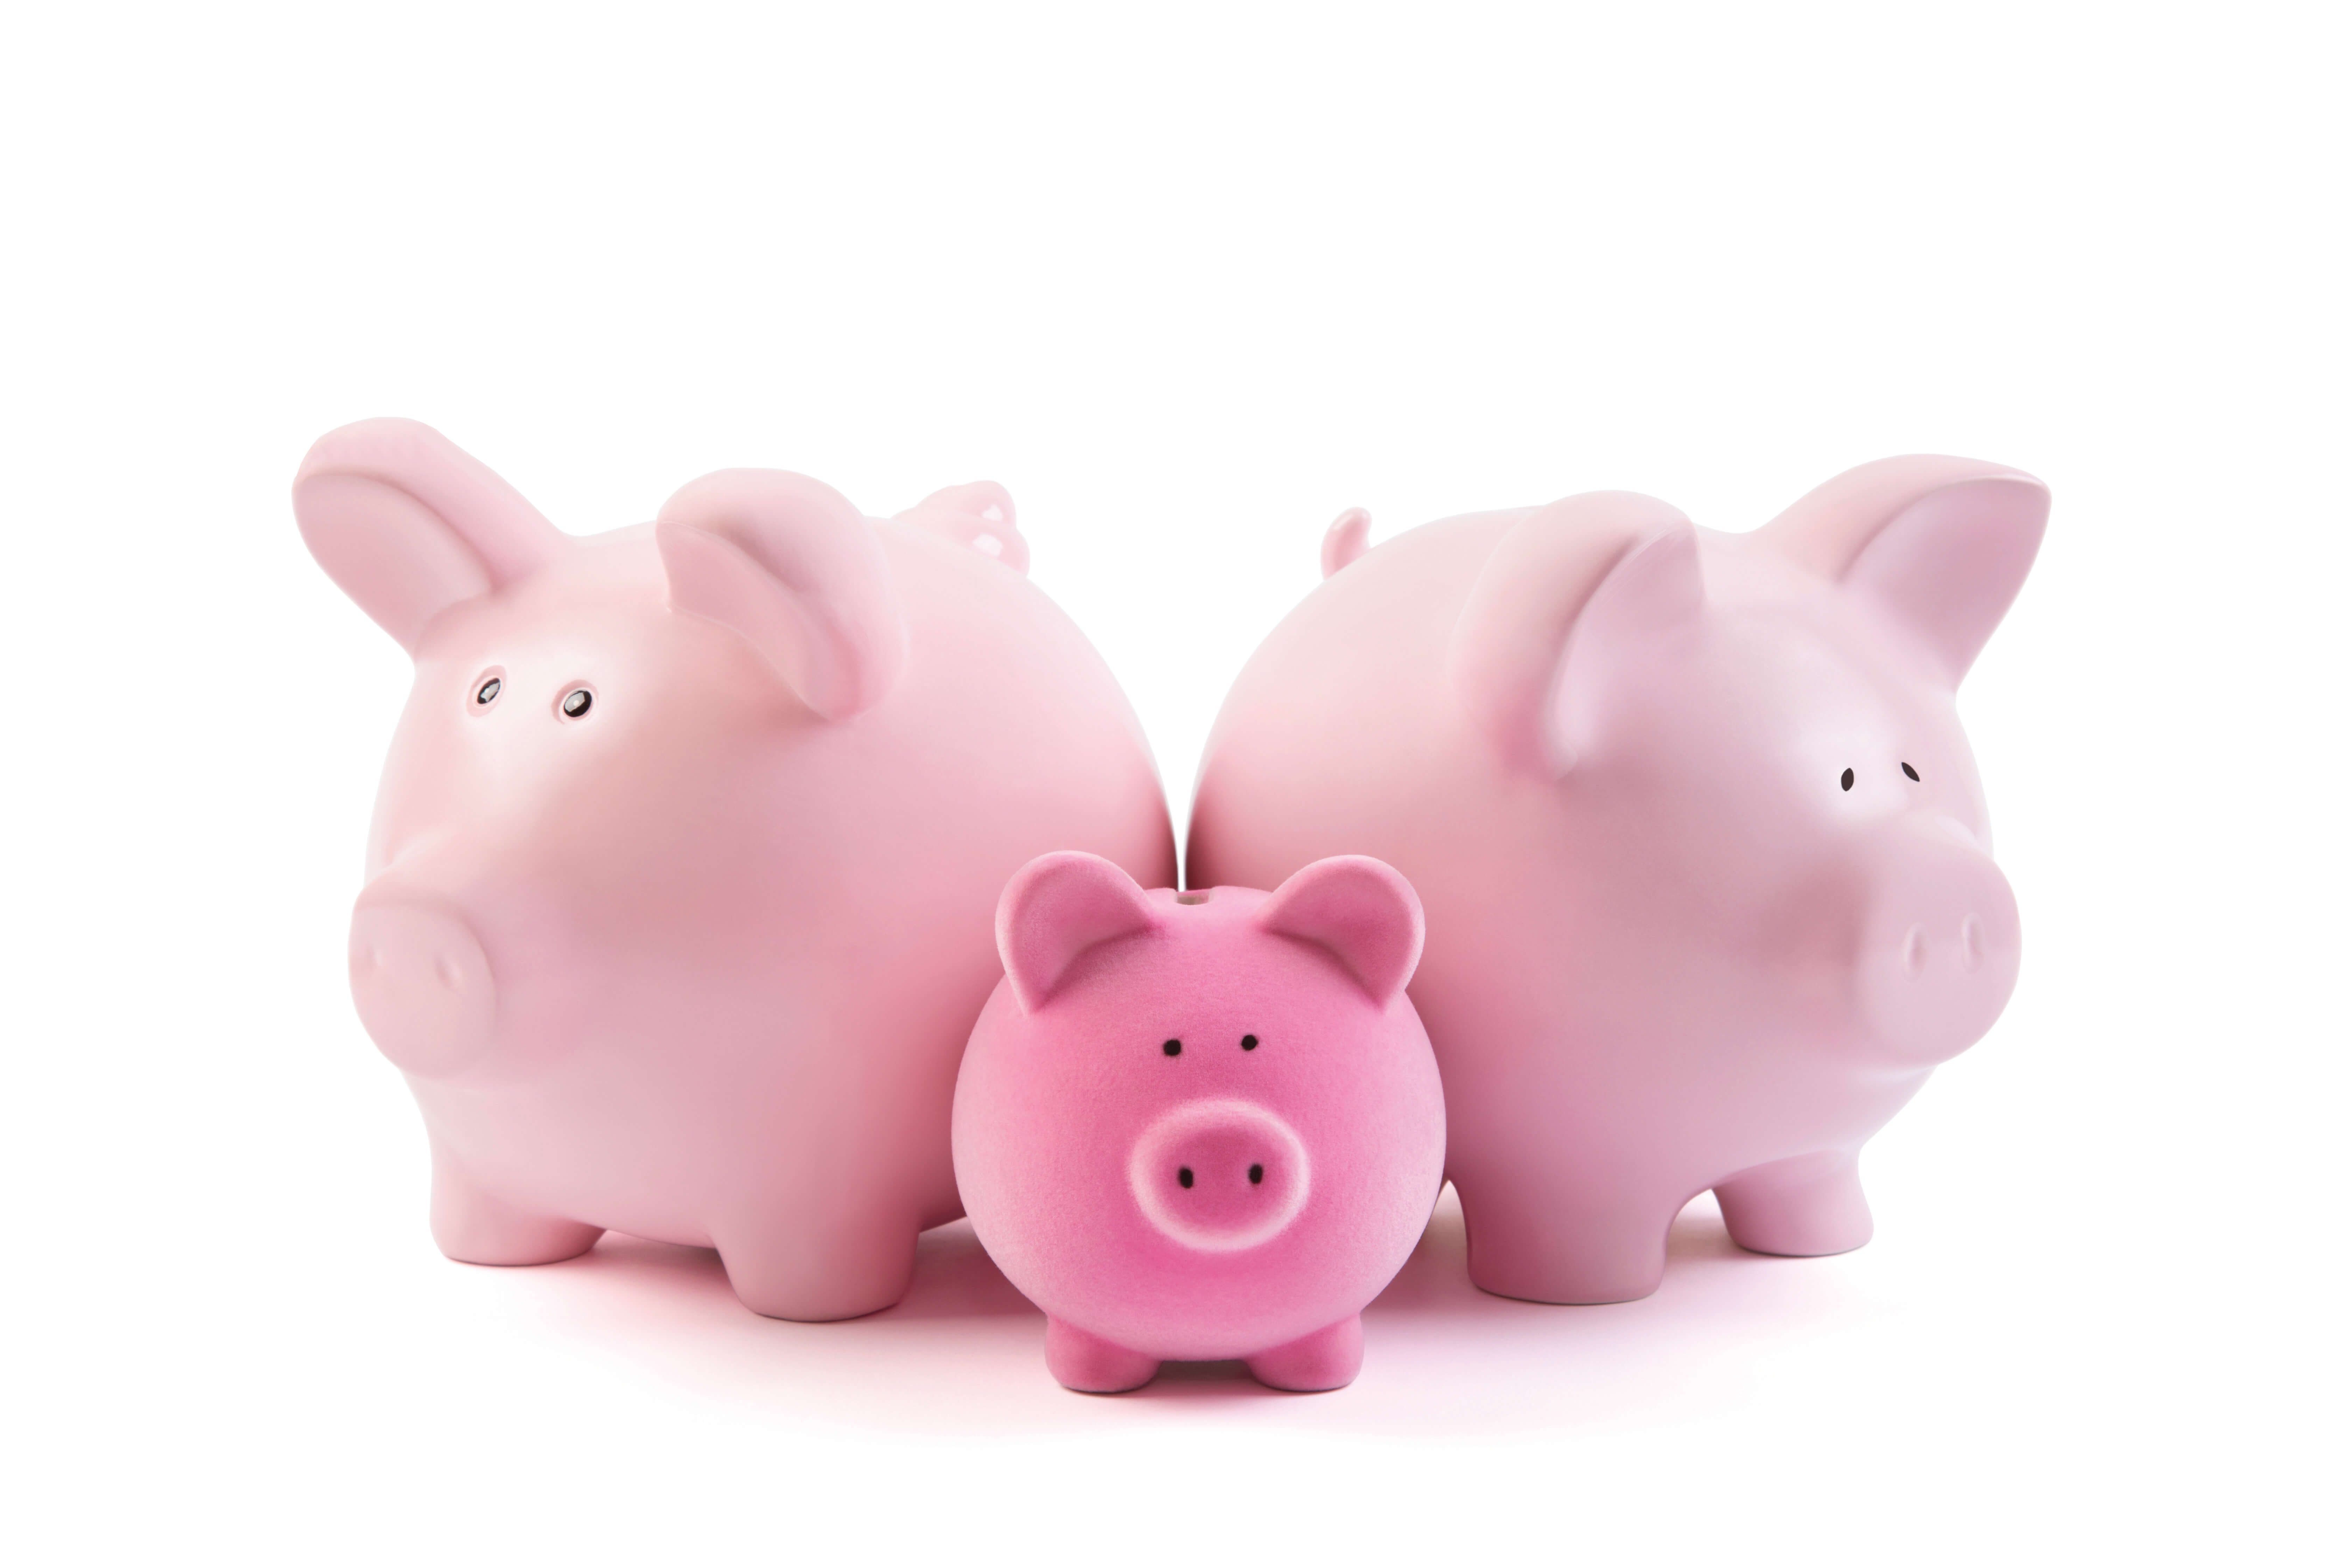 Group of piggy banks over white background with clipping path